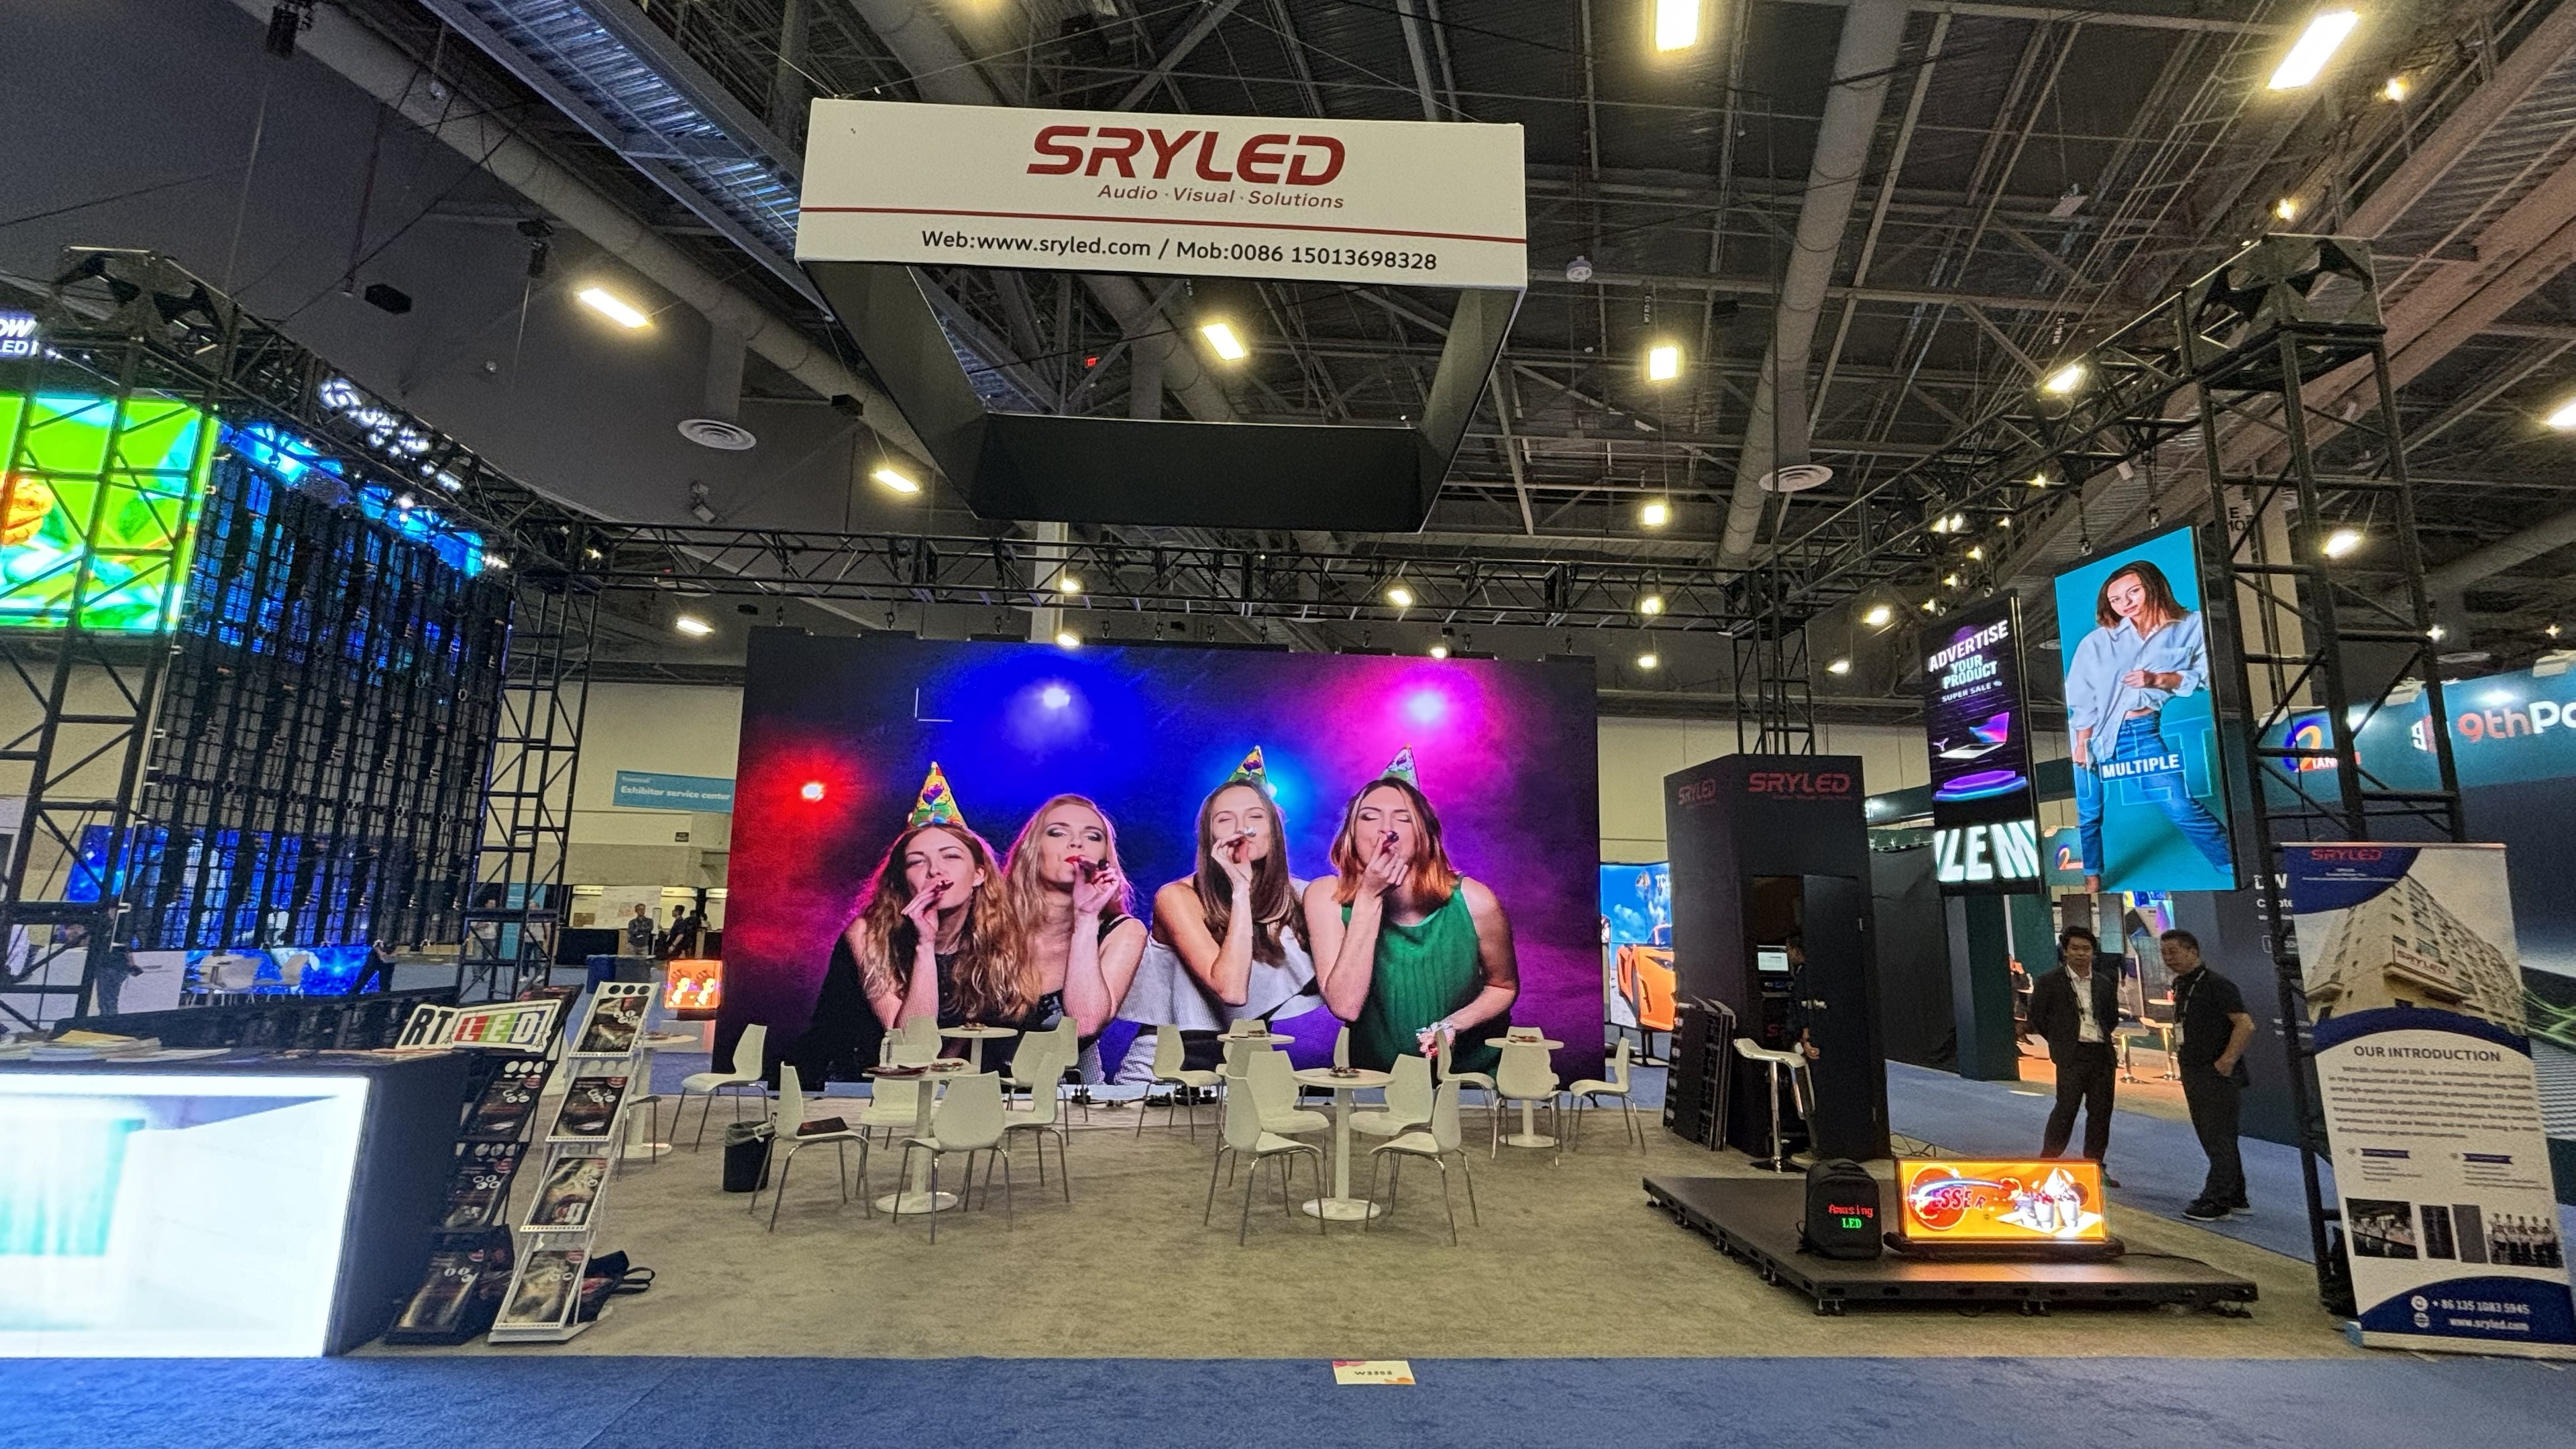 SRYLED and RTLED LED screen show